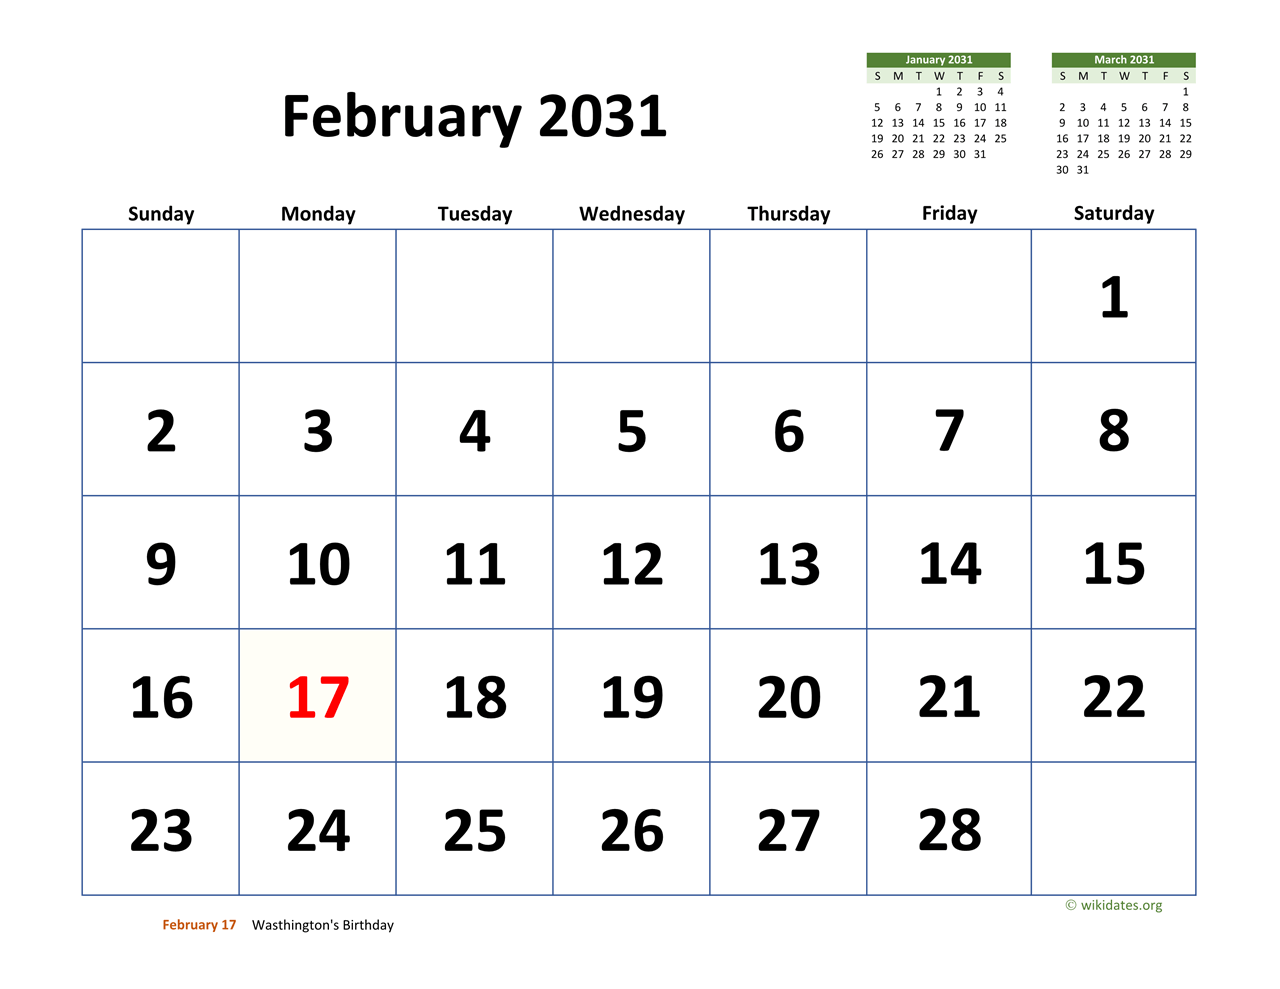 February 2031 Calendar with Extralarge Dates